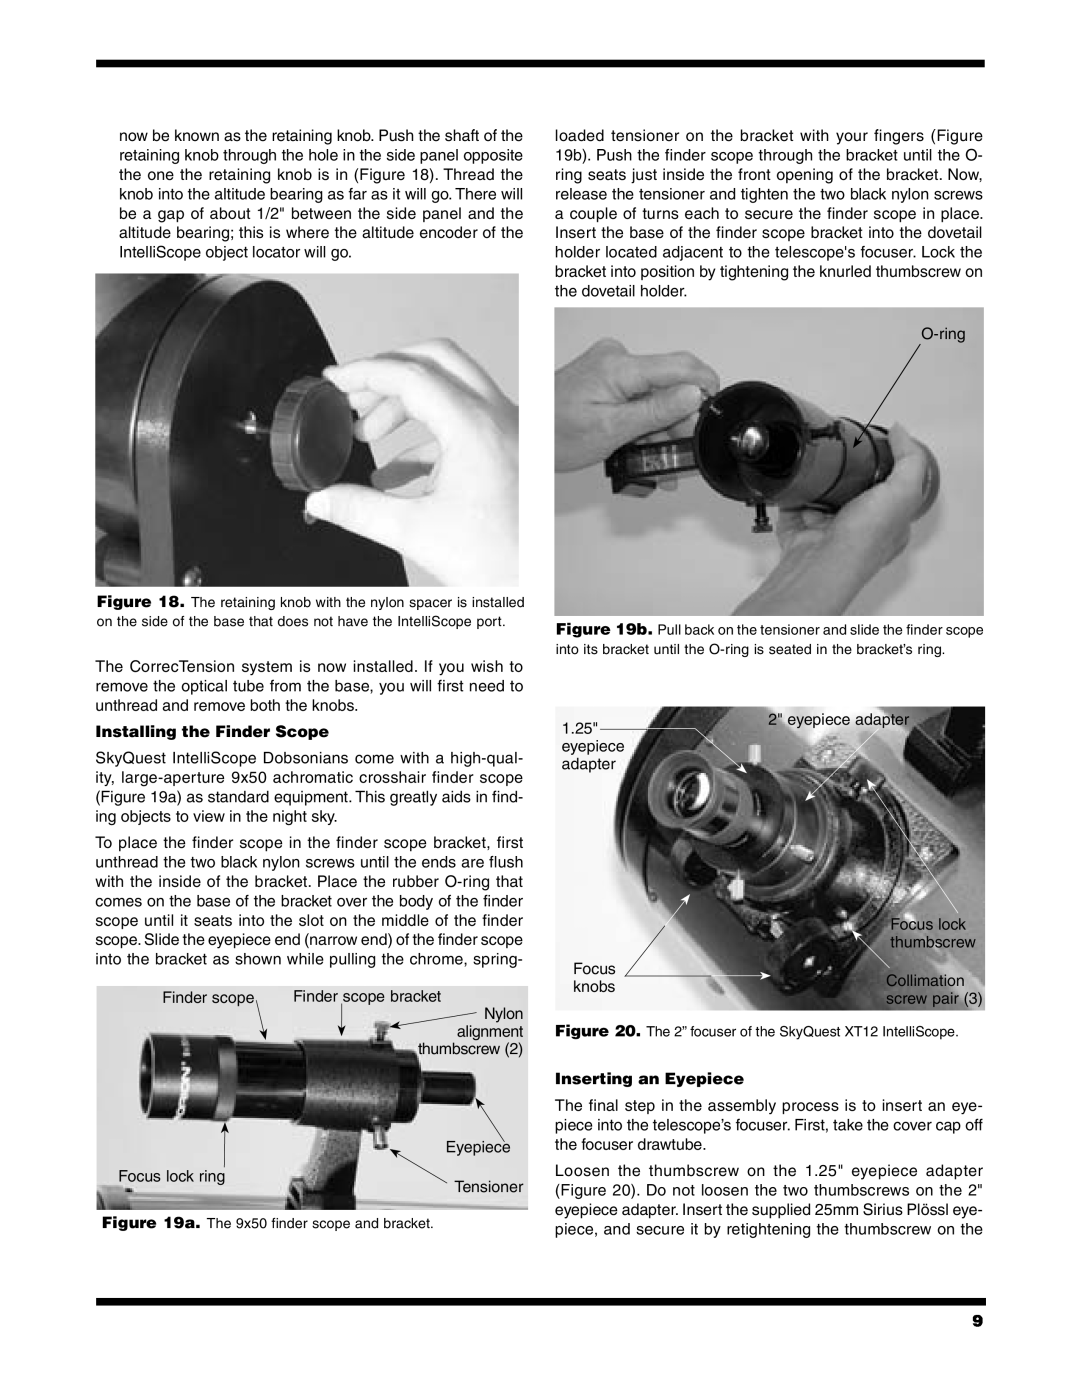 Orion XT12 instruction manual Installing the Finder Scope, Inserting an Eyepiece 